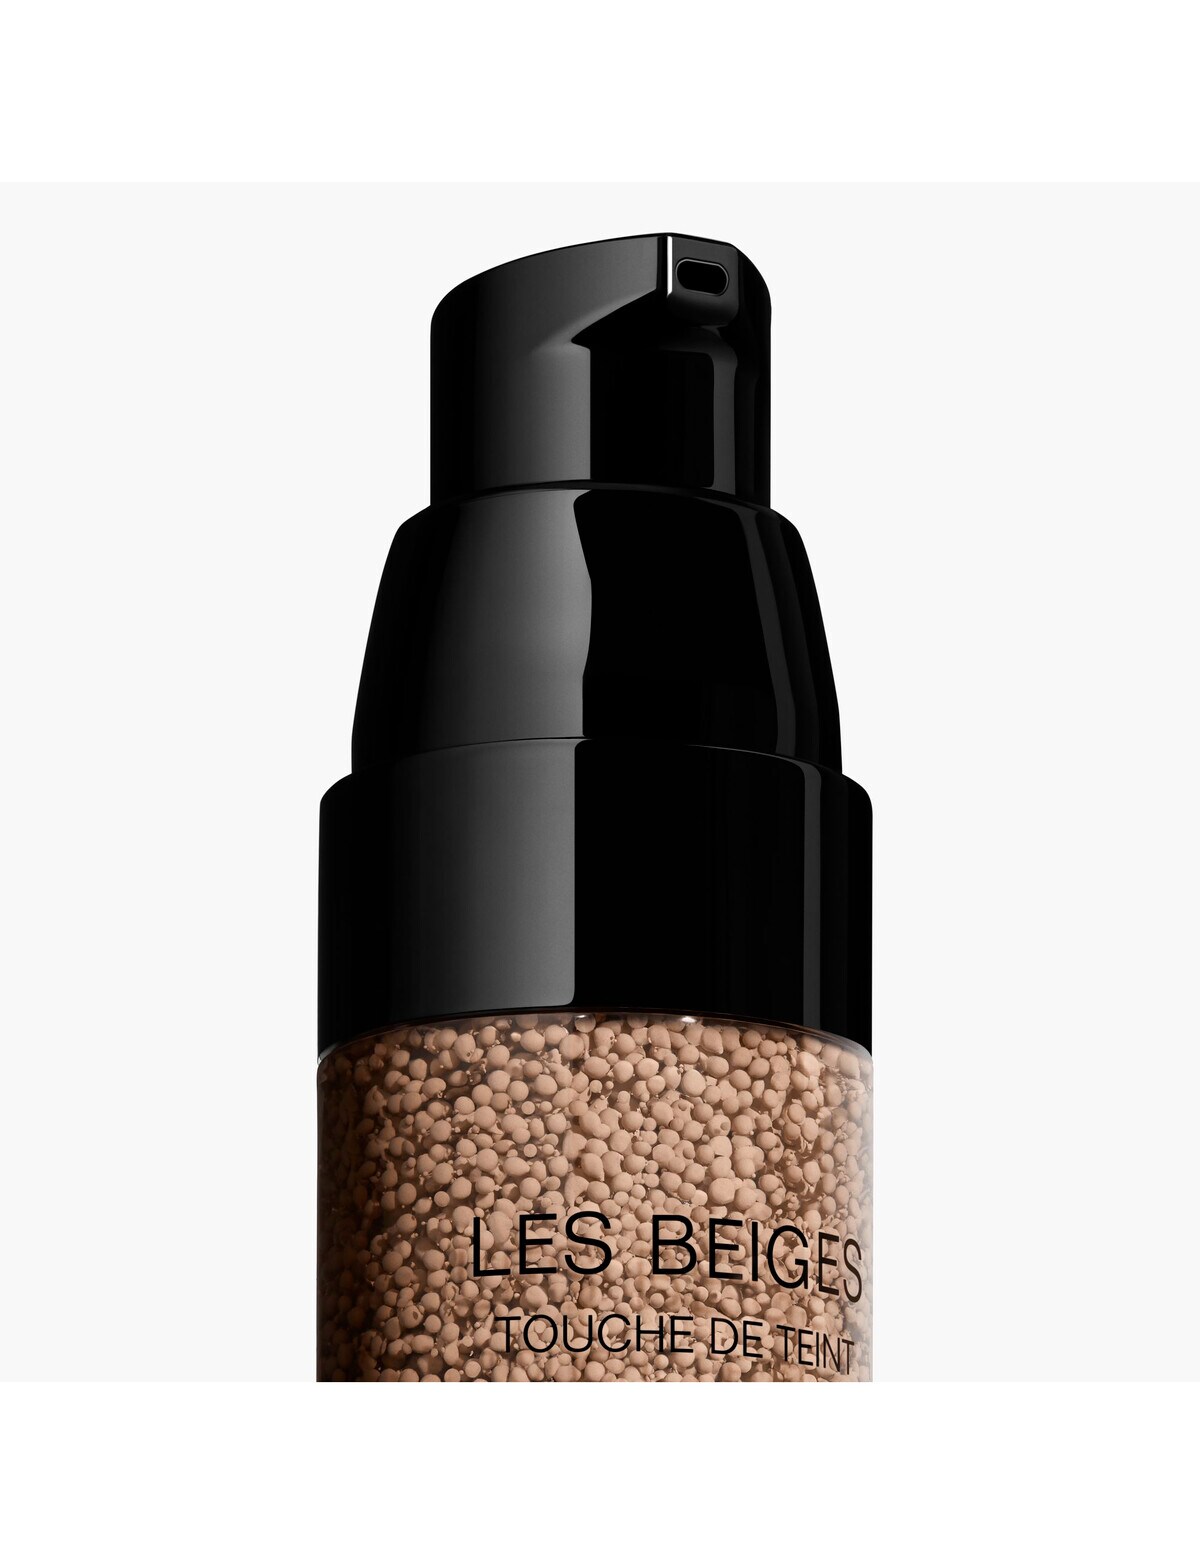 CHANEL LES BEIGES WATER-FRESH COMPLEXION TOUCH Even - Illuminate - Hydrate  - HEALTHY GLOW MAKEUP